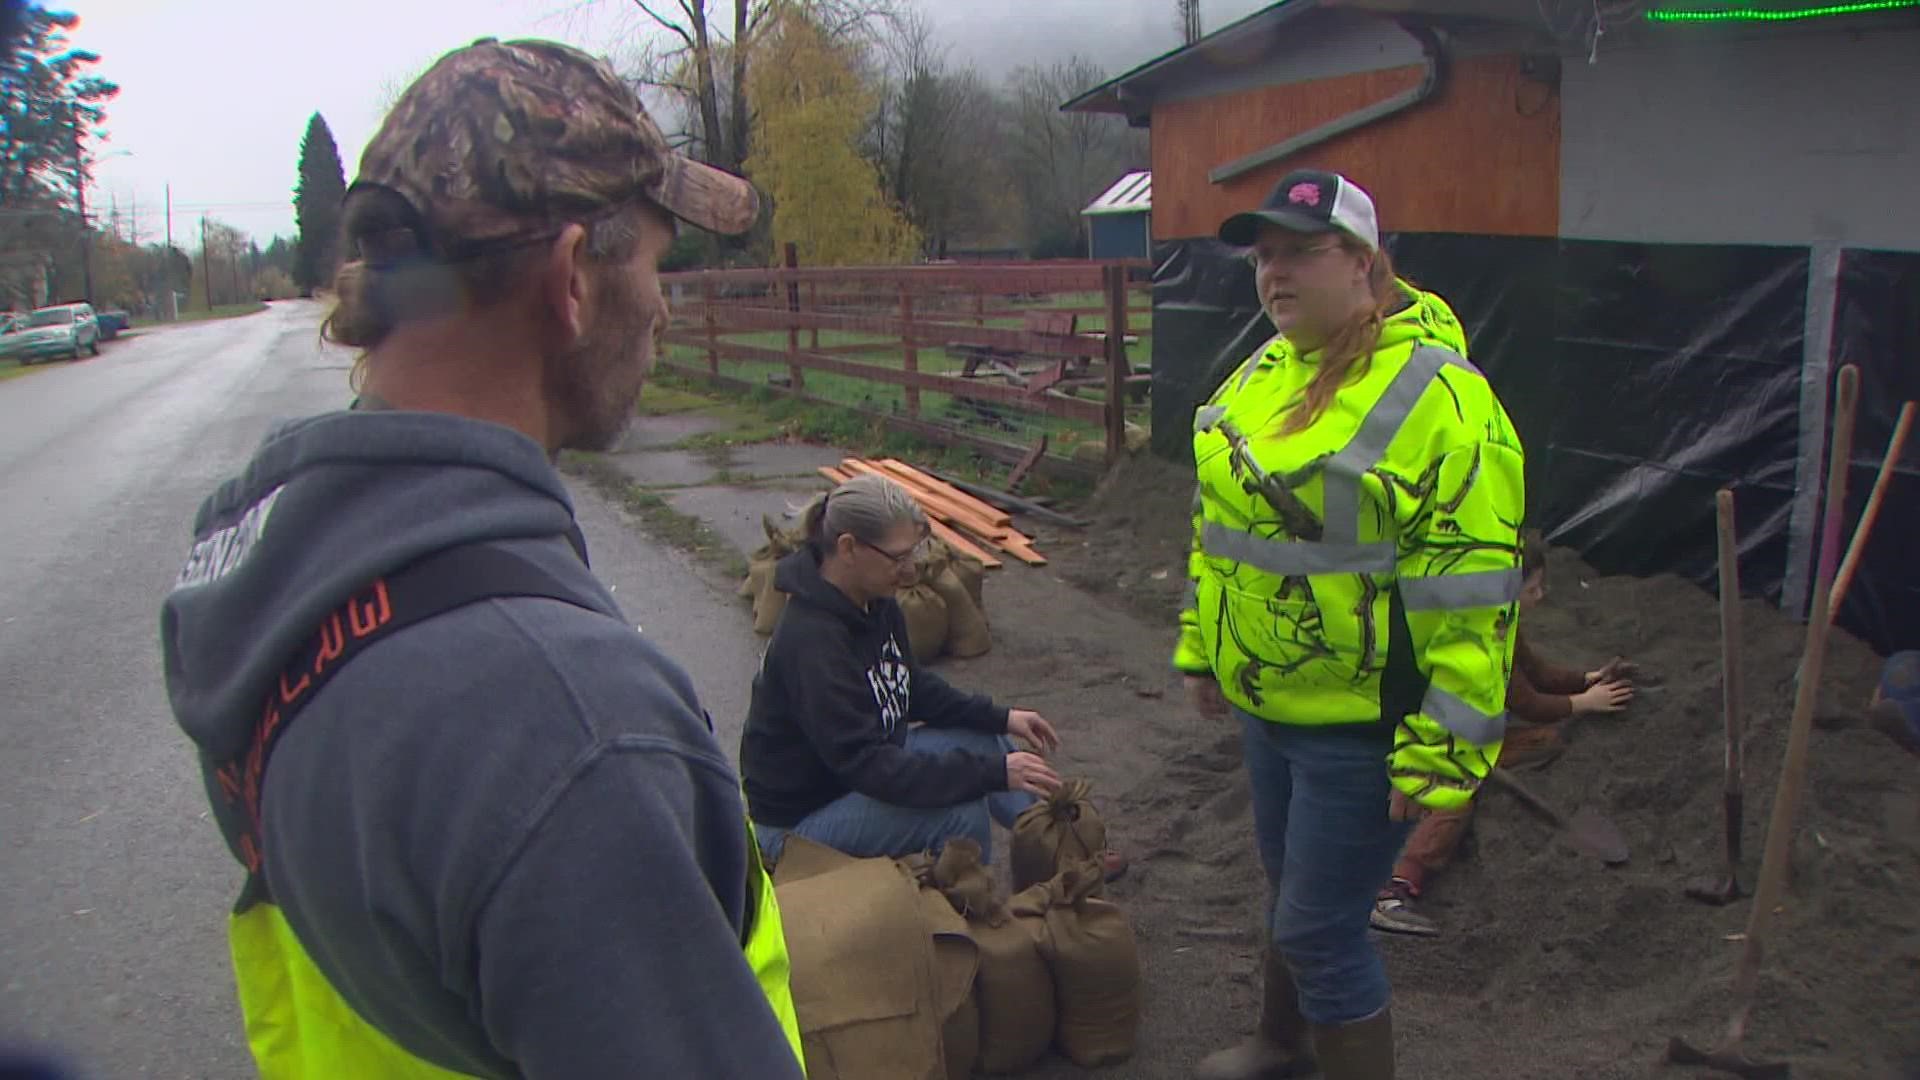 Flooding is not uncommon in Hamilton where residents were busy working to save homes and businesses Sunday.